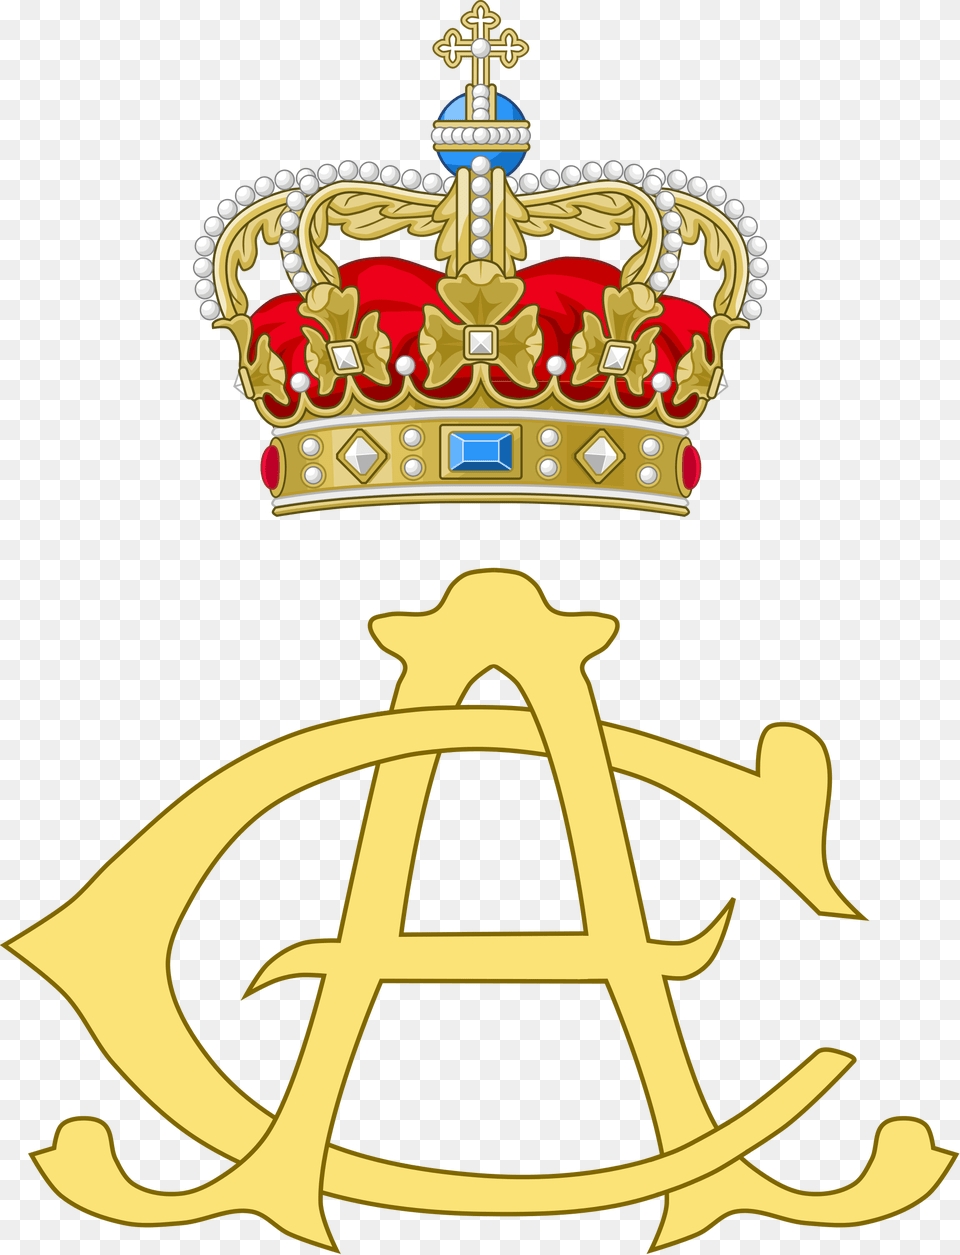 King Christian And Queen Alexandrine Of Denmark Royal Royal Monogram Denmark, Accessories, Jewelry, Crown Png Image